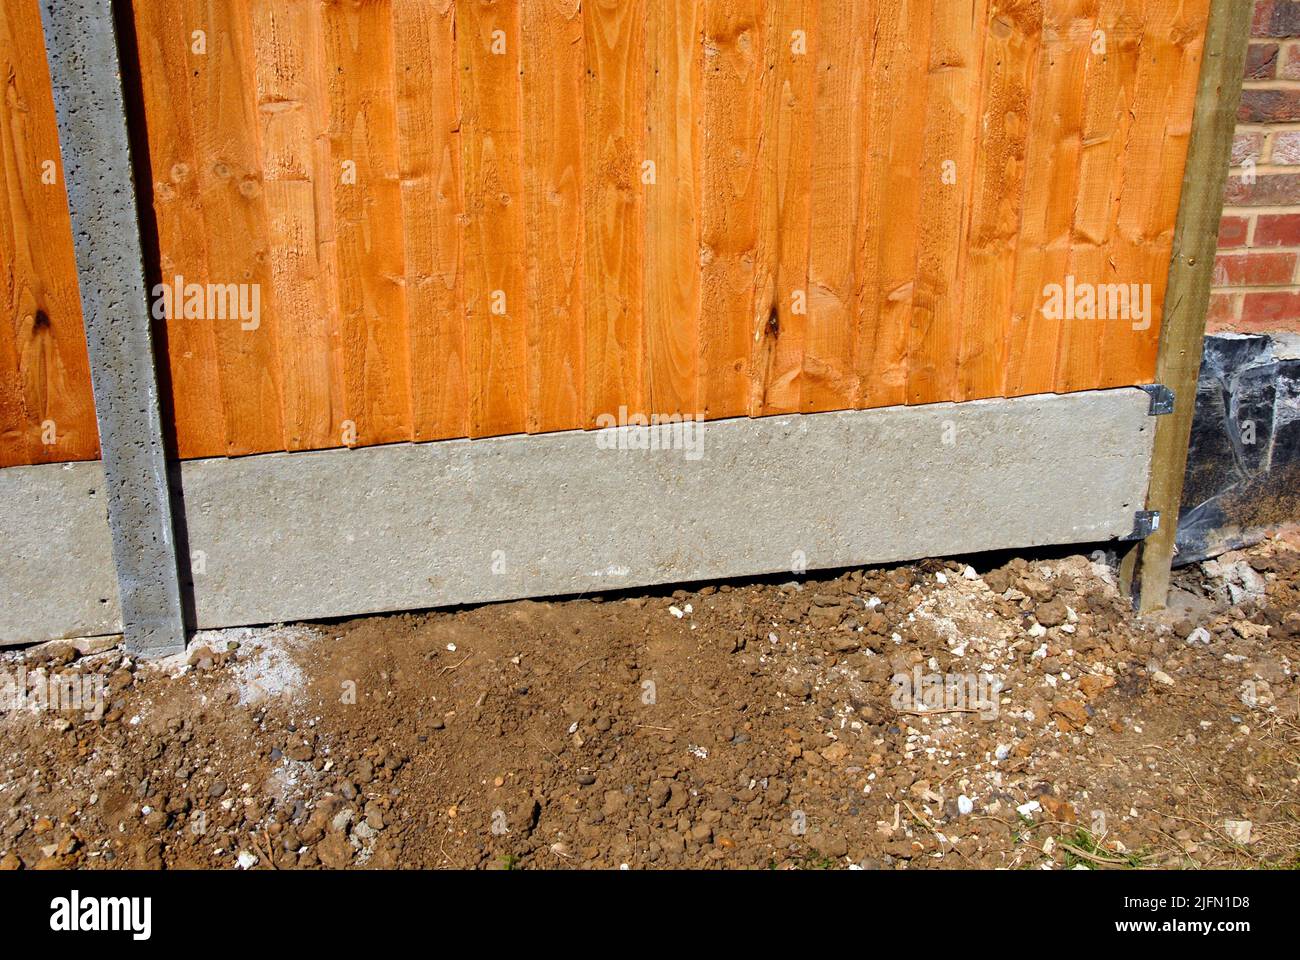 Fencing in area with undulating soil levels, using mix of concrete and wooden posts, wooden panel and concrete gravel board held up by metal brackets Stock Photo